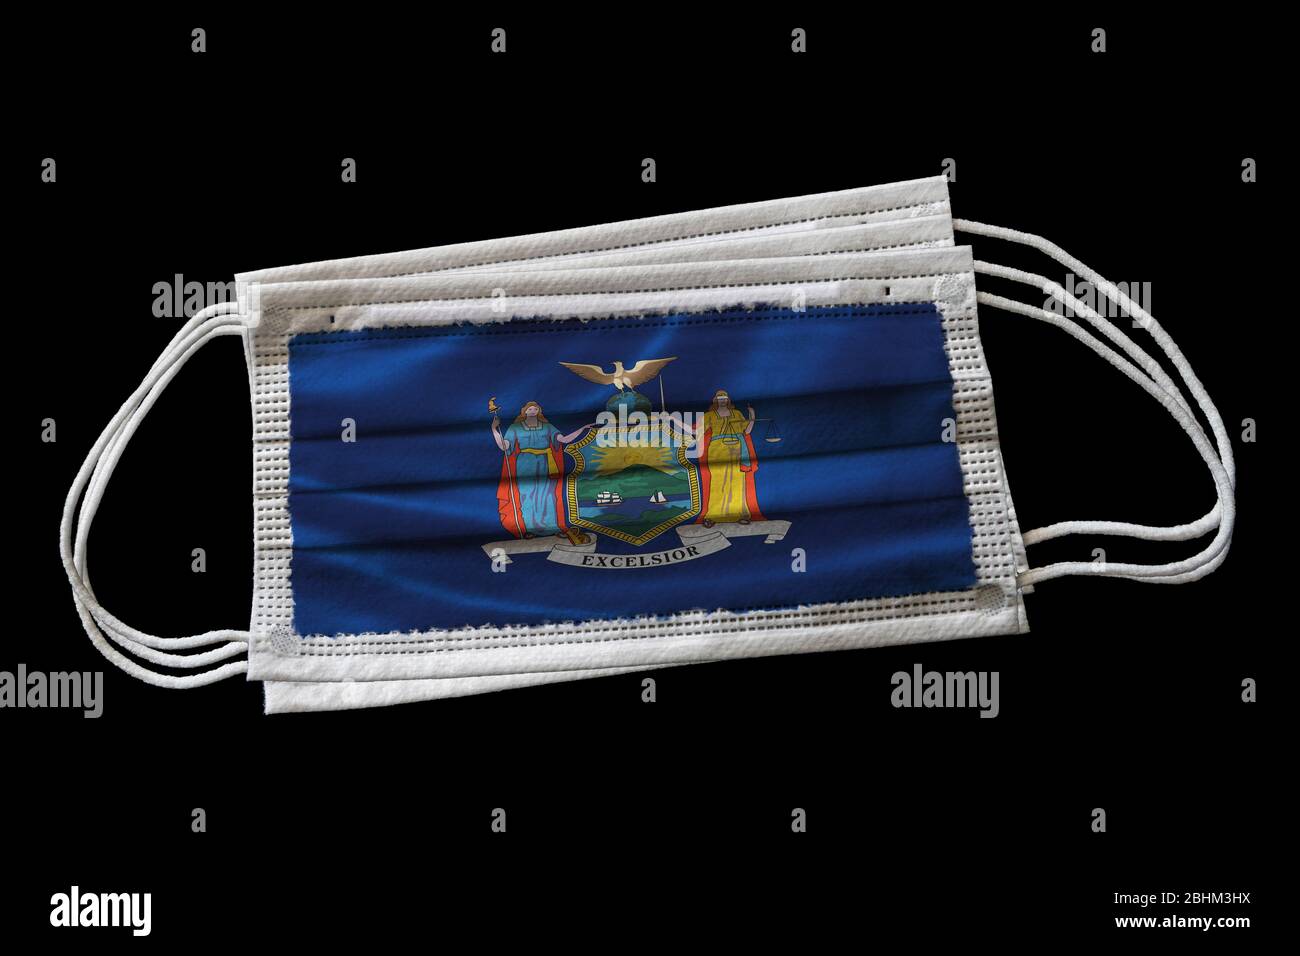 Multiple surgical face masks with New York state flag printed. Isolated on black background. Concept of face mask usage in New Yorkers effort to comba Stock Photo